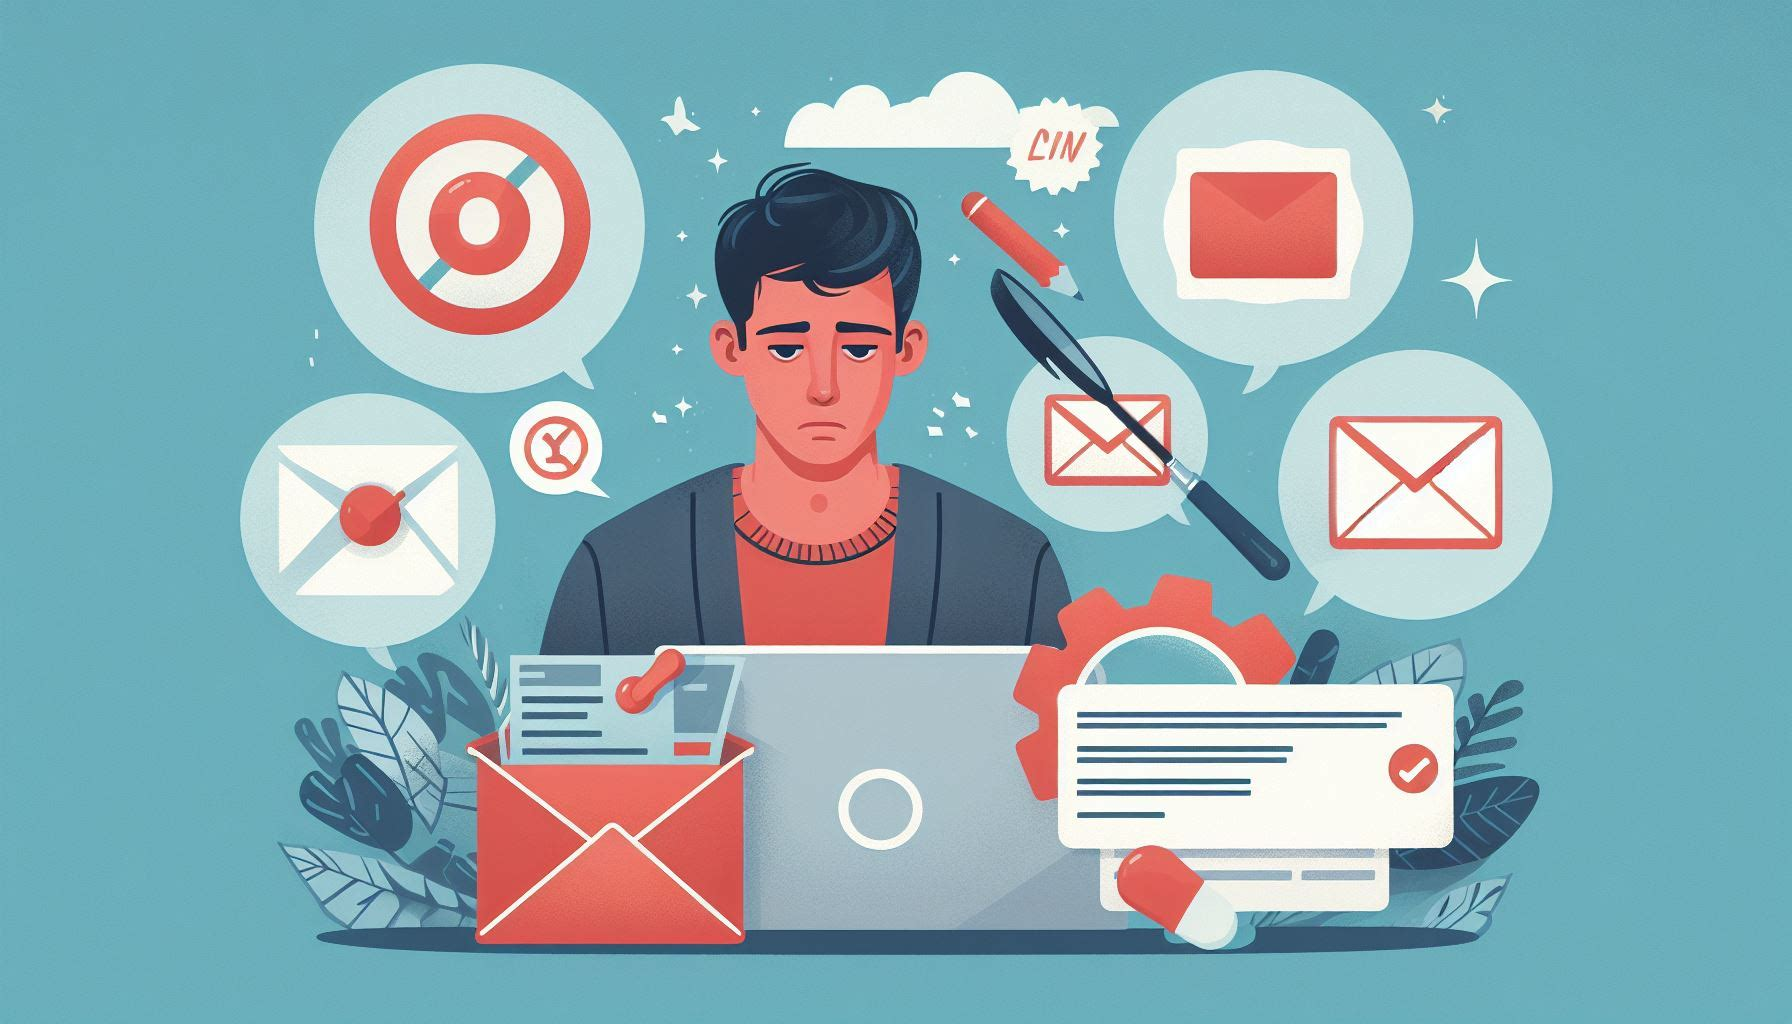 Illustration of email marketing pitfalls: poor subject lines, irrelevant content, lack of personalization.